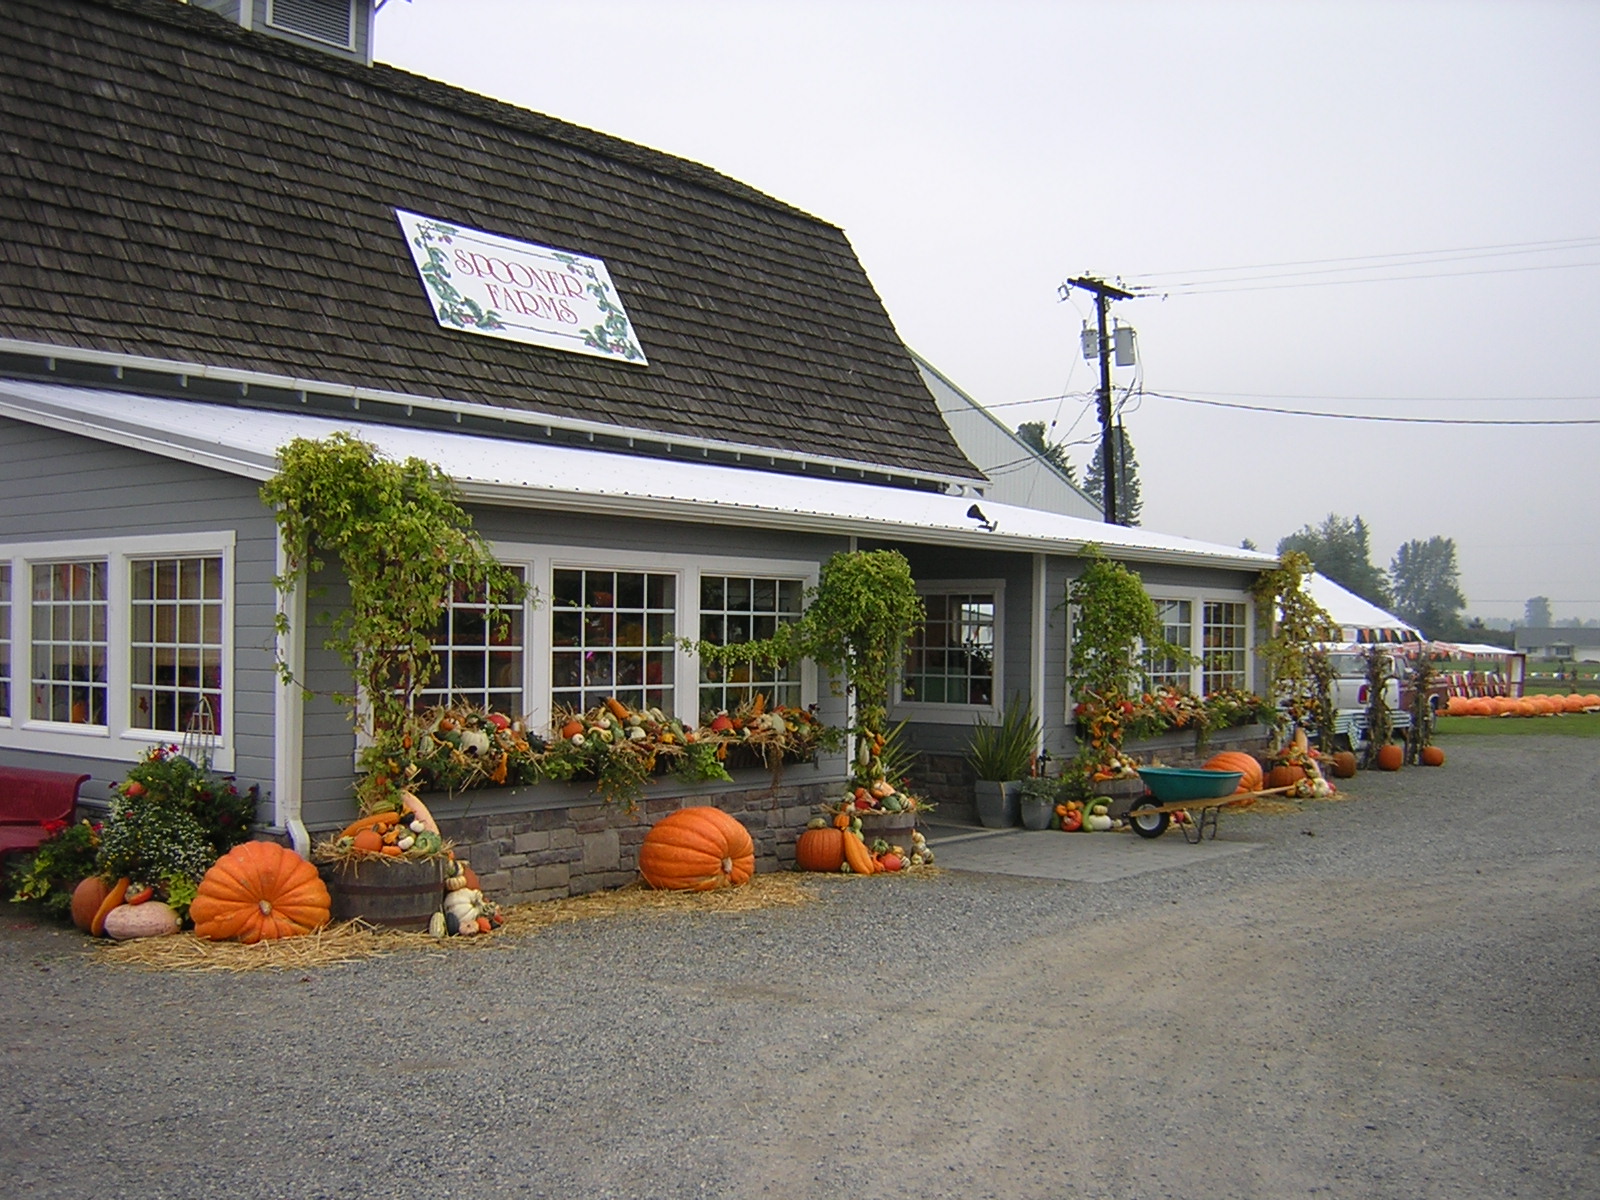 Spooner Farms Retail Berries and Pumpkin Patch